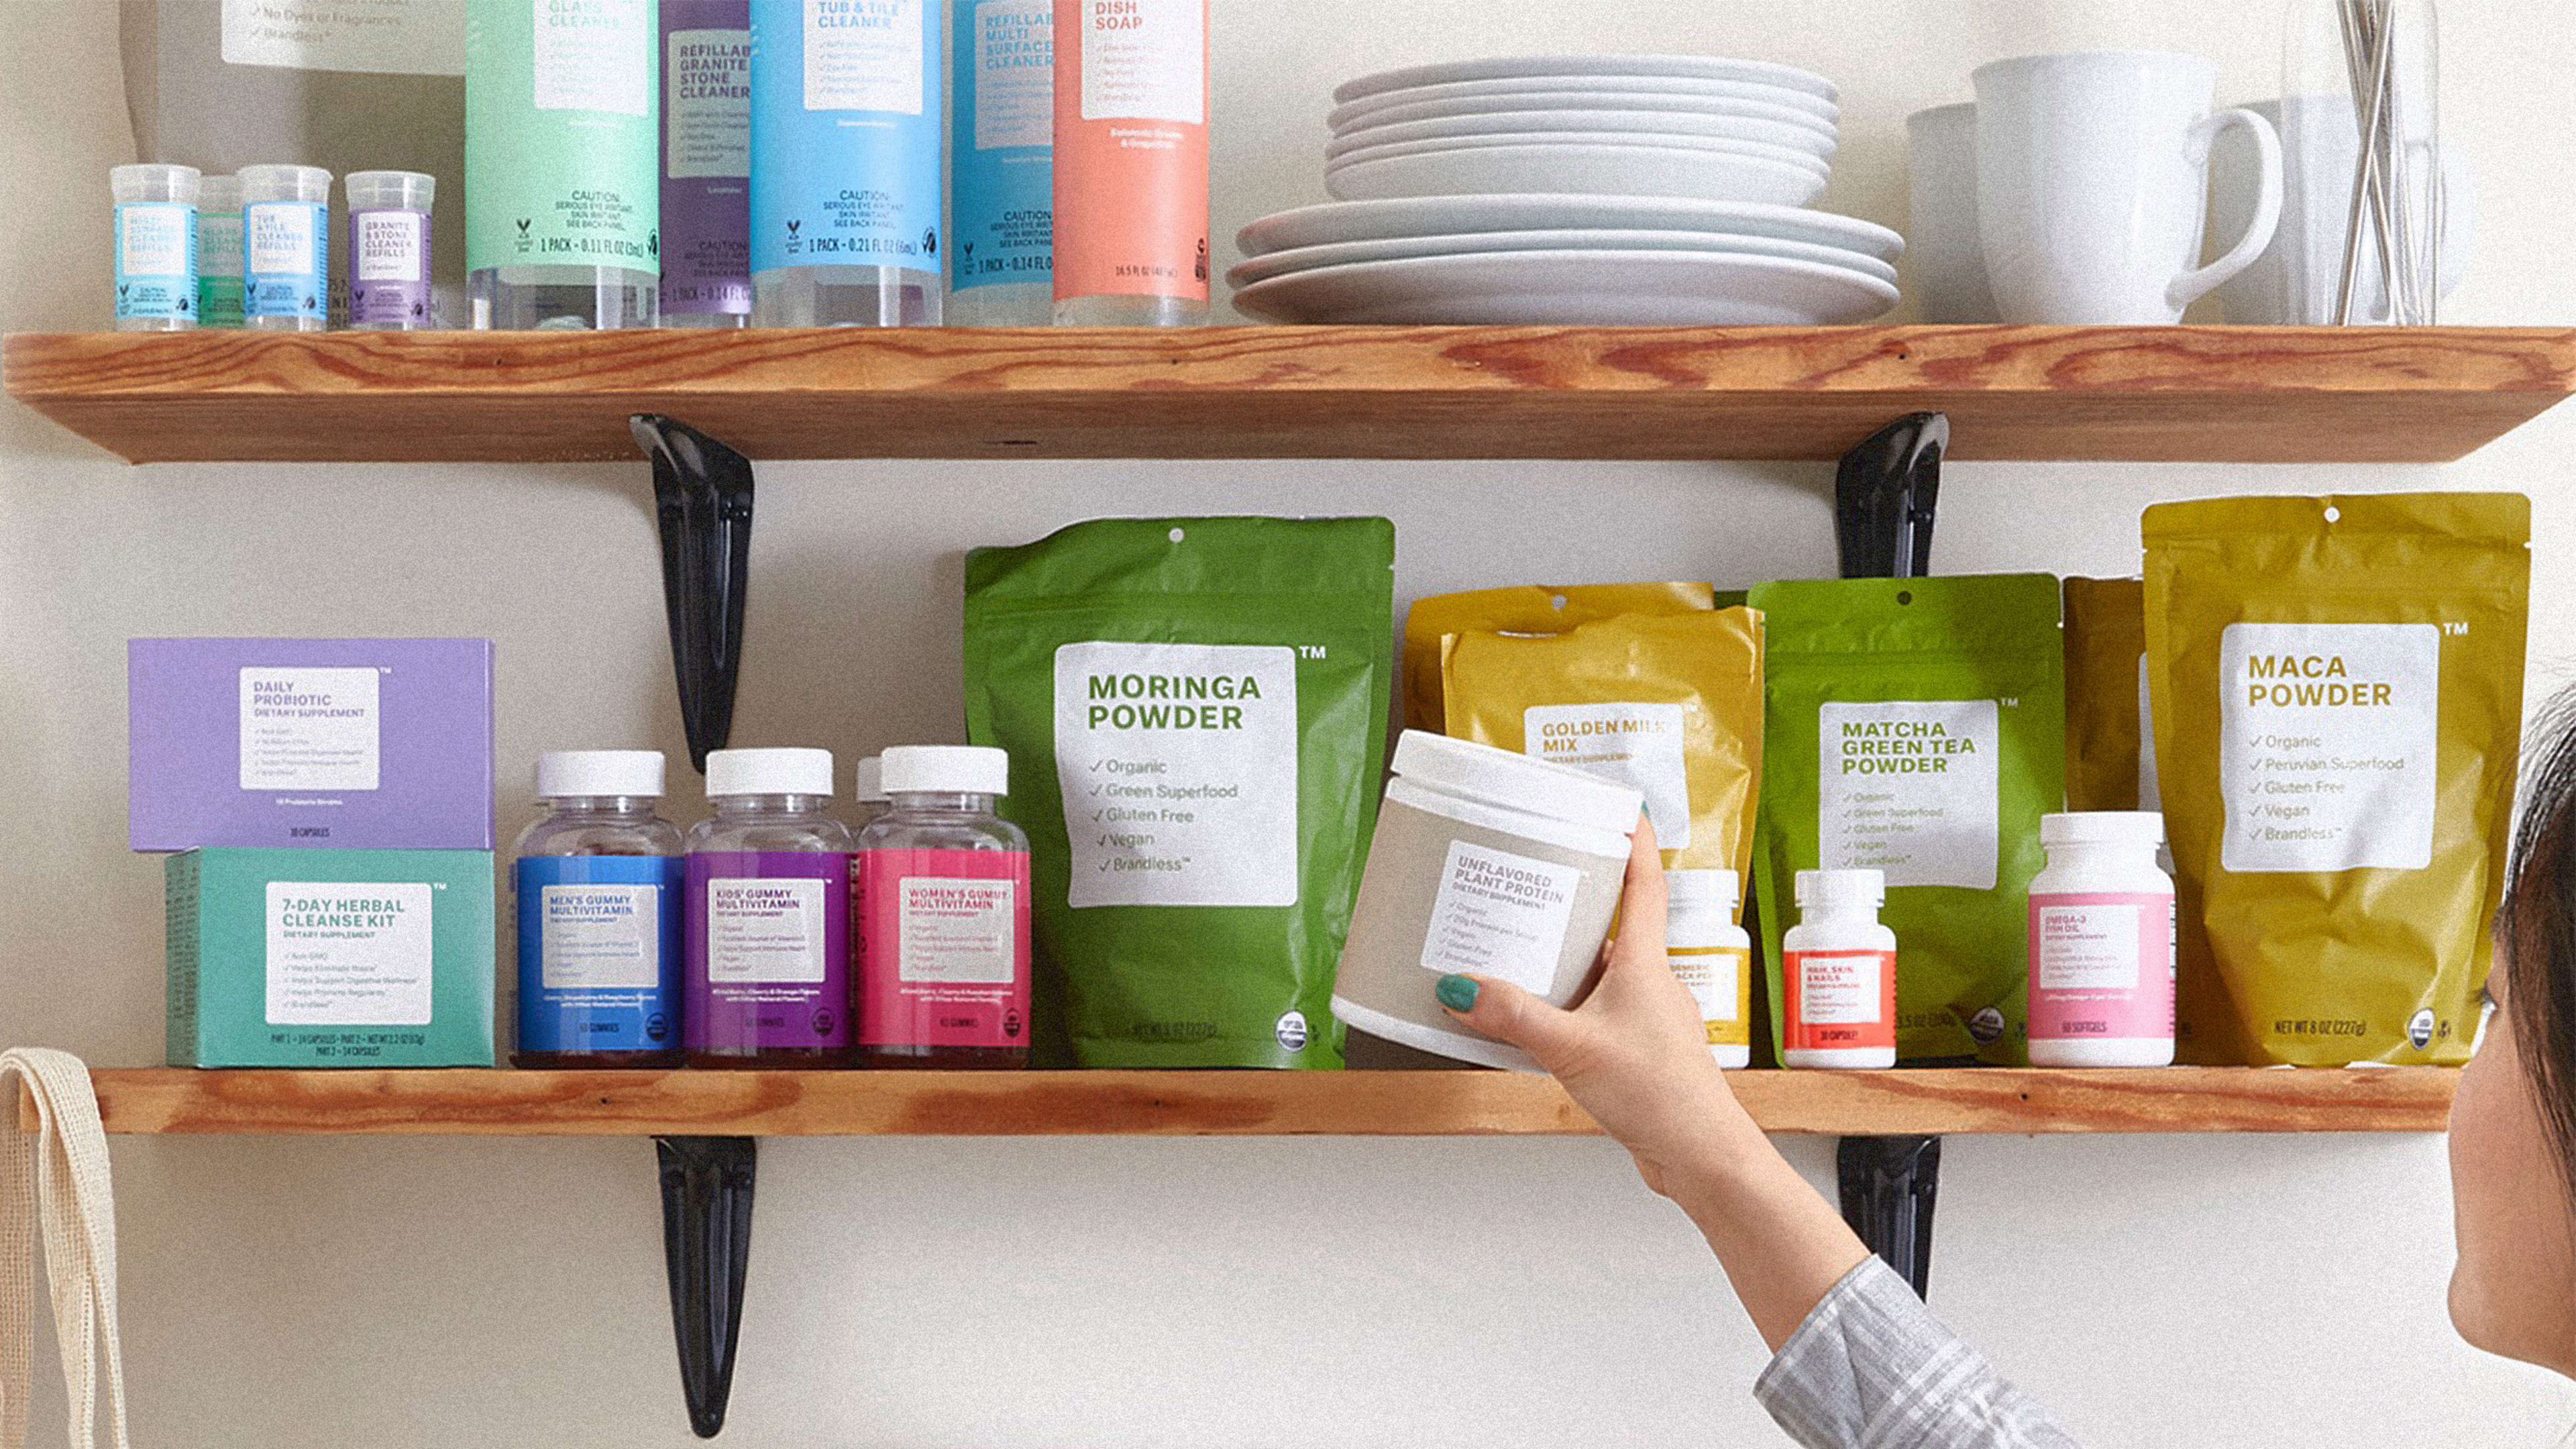 Remember Brandless, the Amazon alternative that crashed and burned? It’s back!